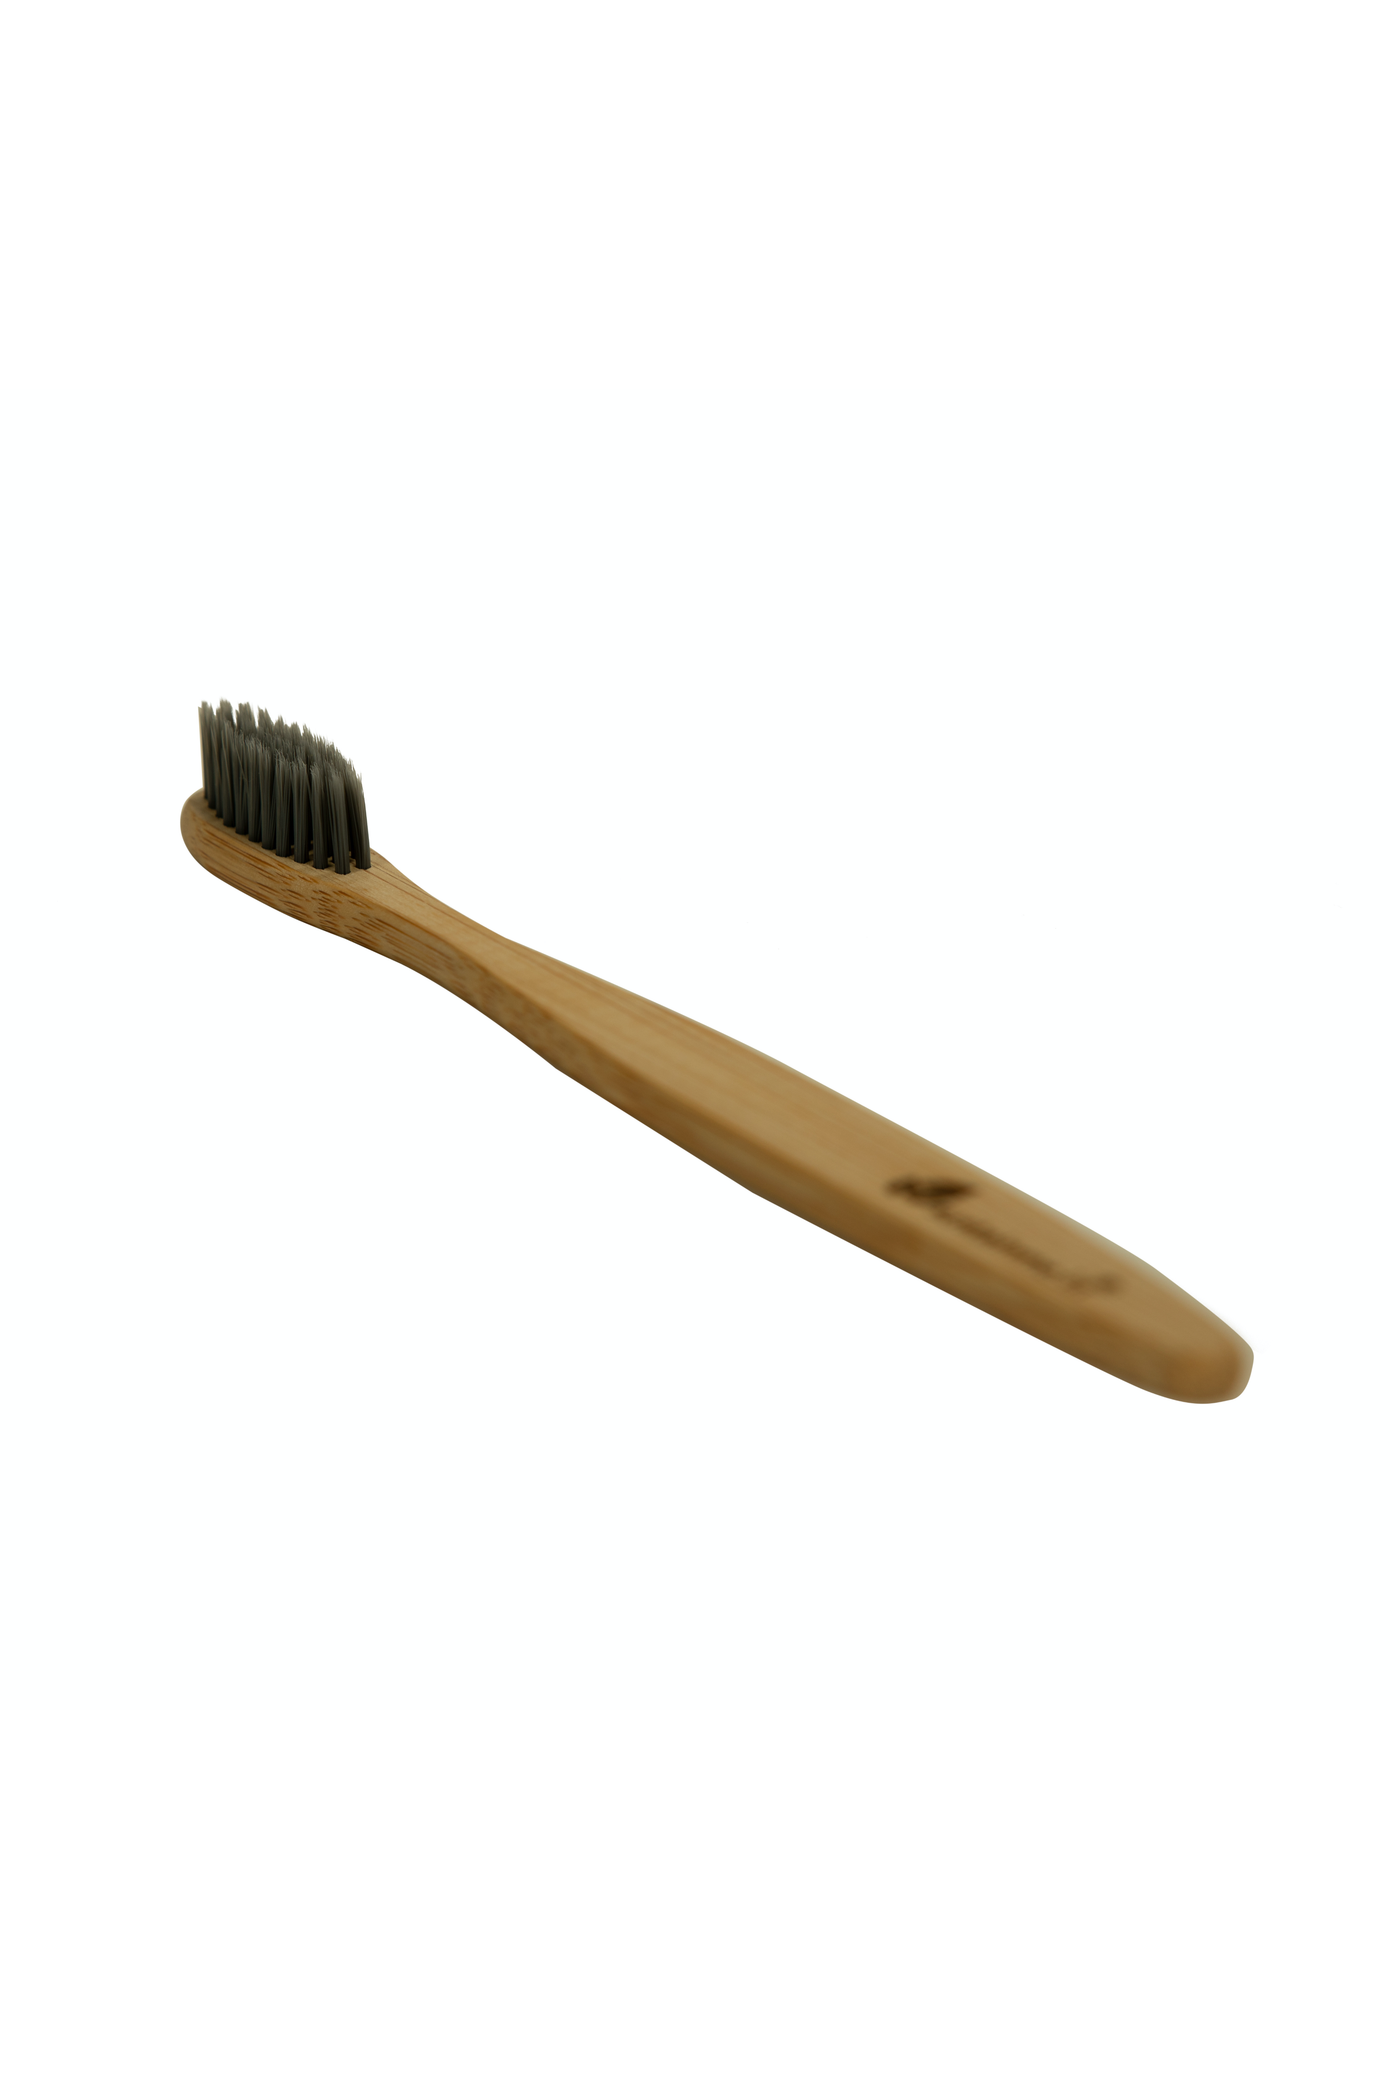 Bamboo Toothbrush: A True Step Towards Nature